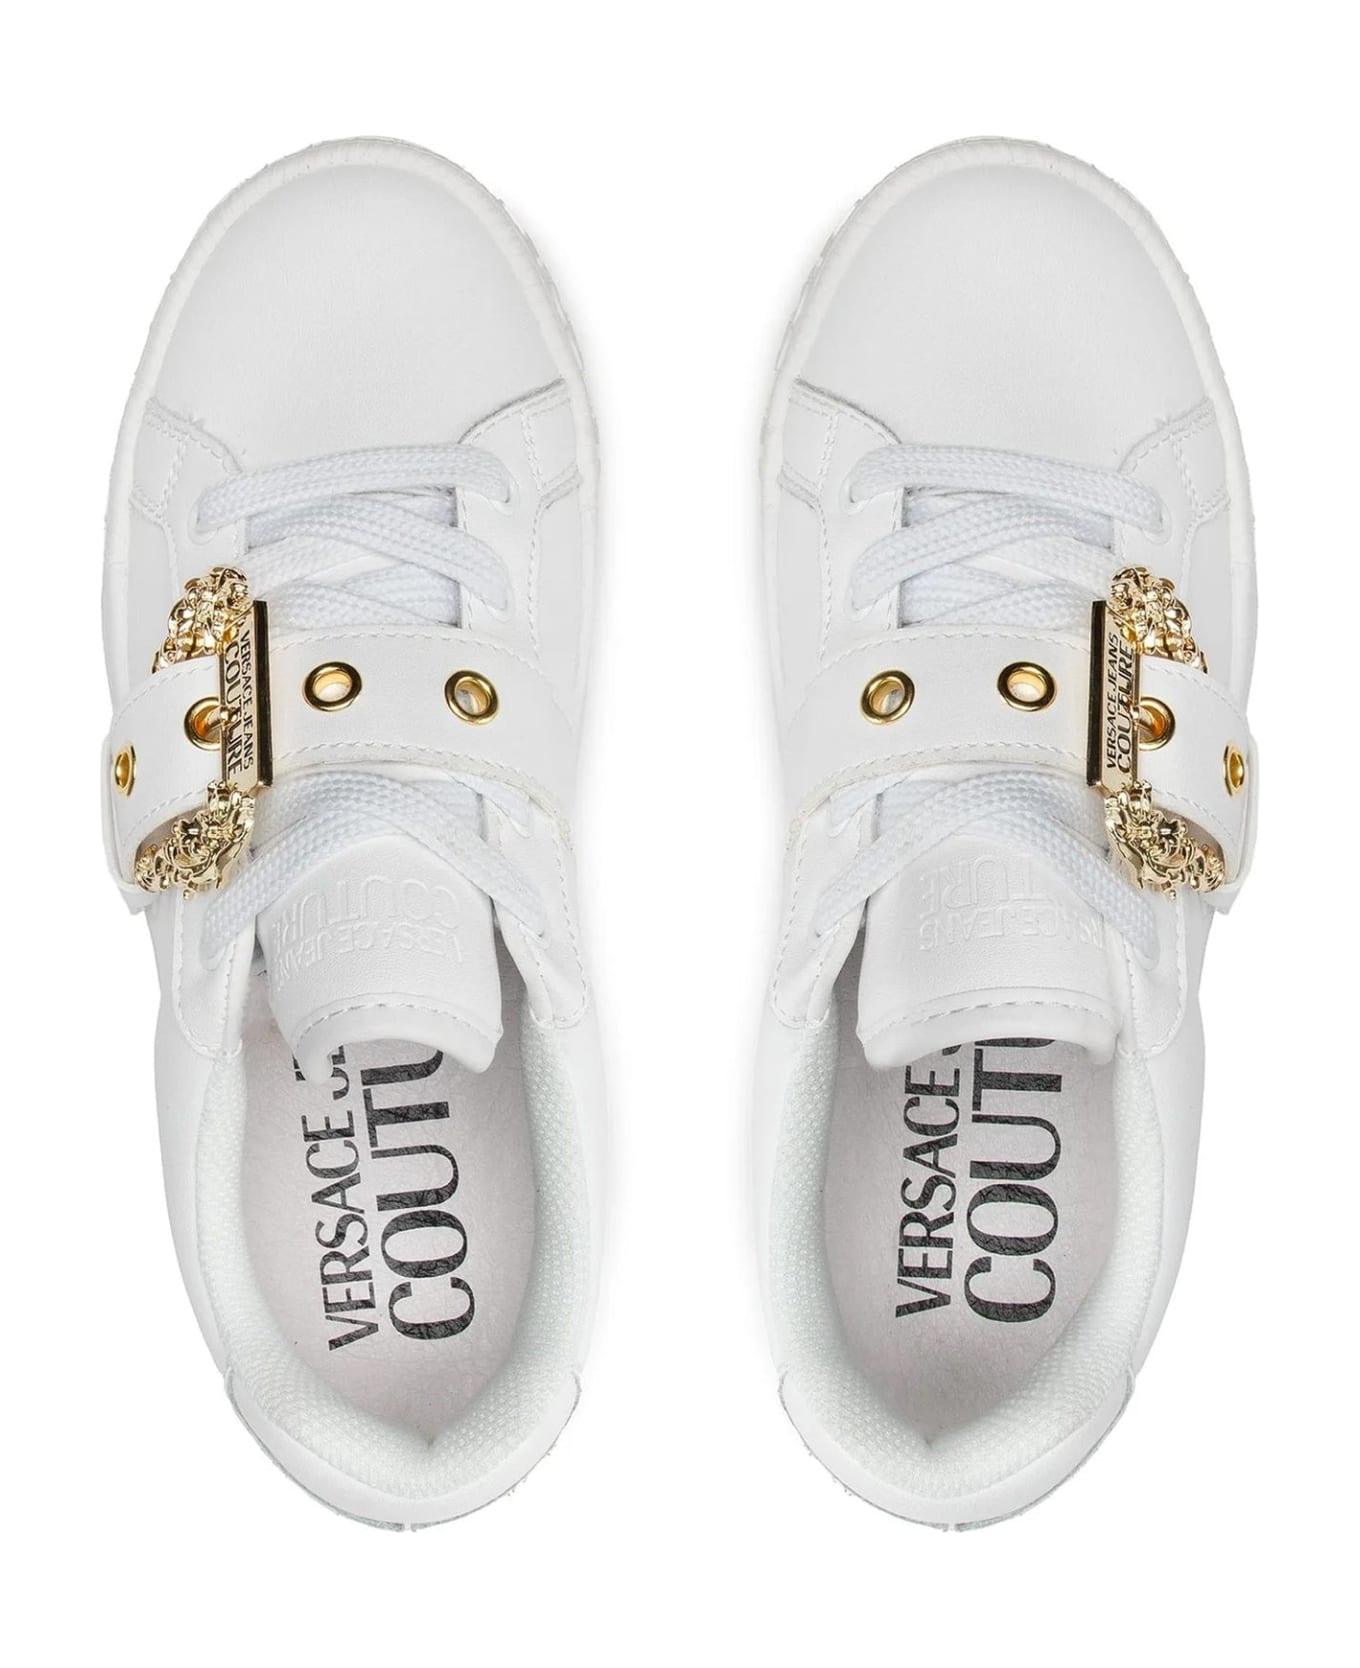 Versace Jeans Couture Jeans Couture Leather Logo Sneakers - White